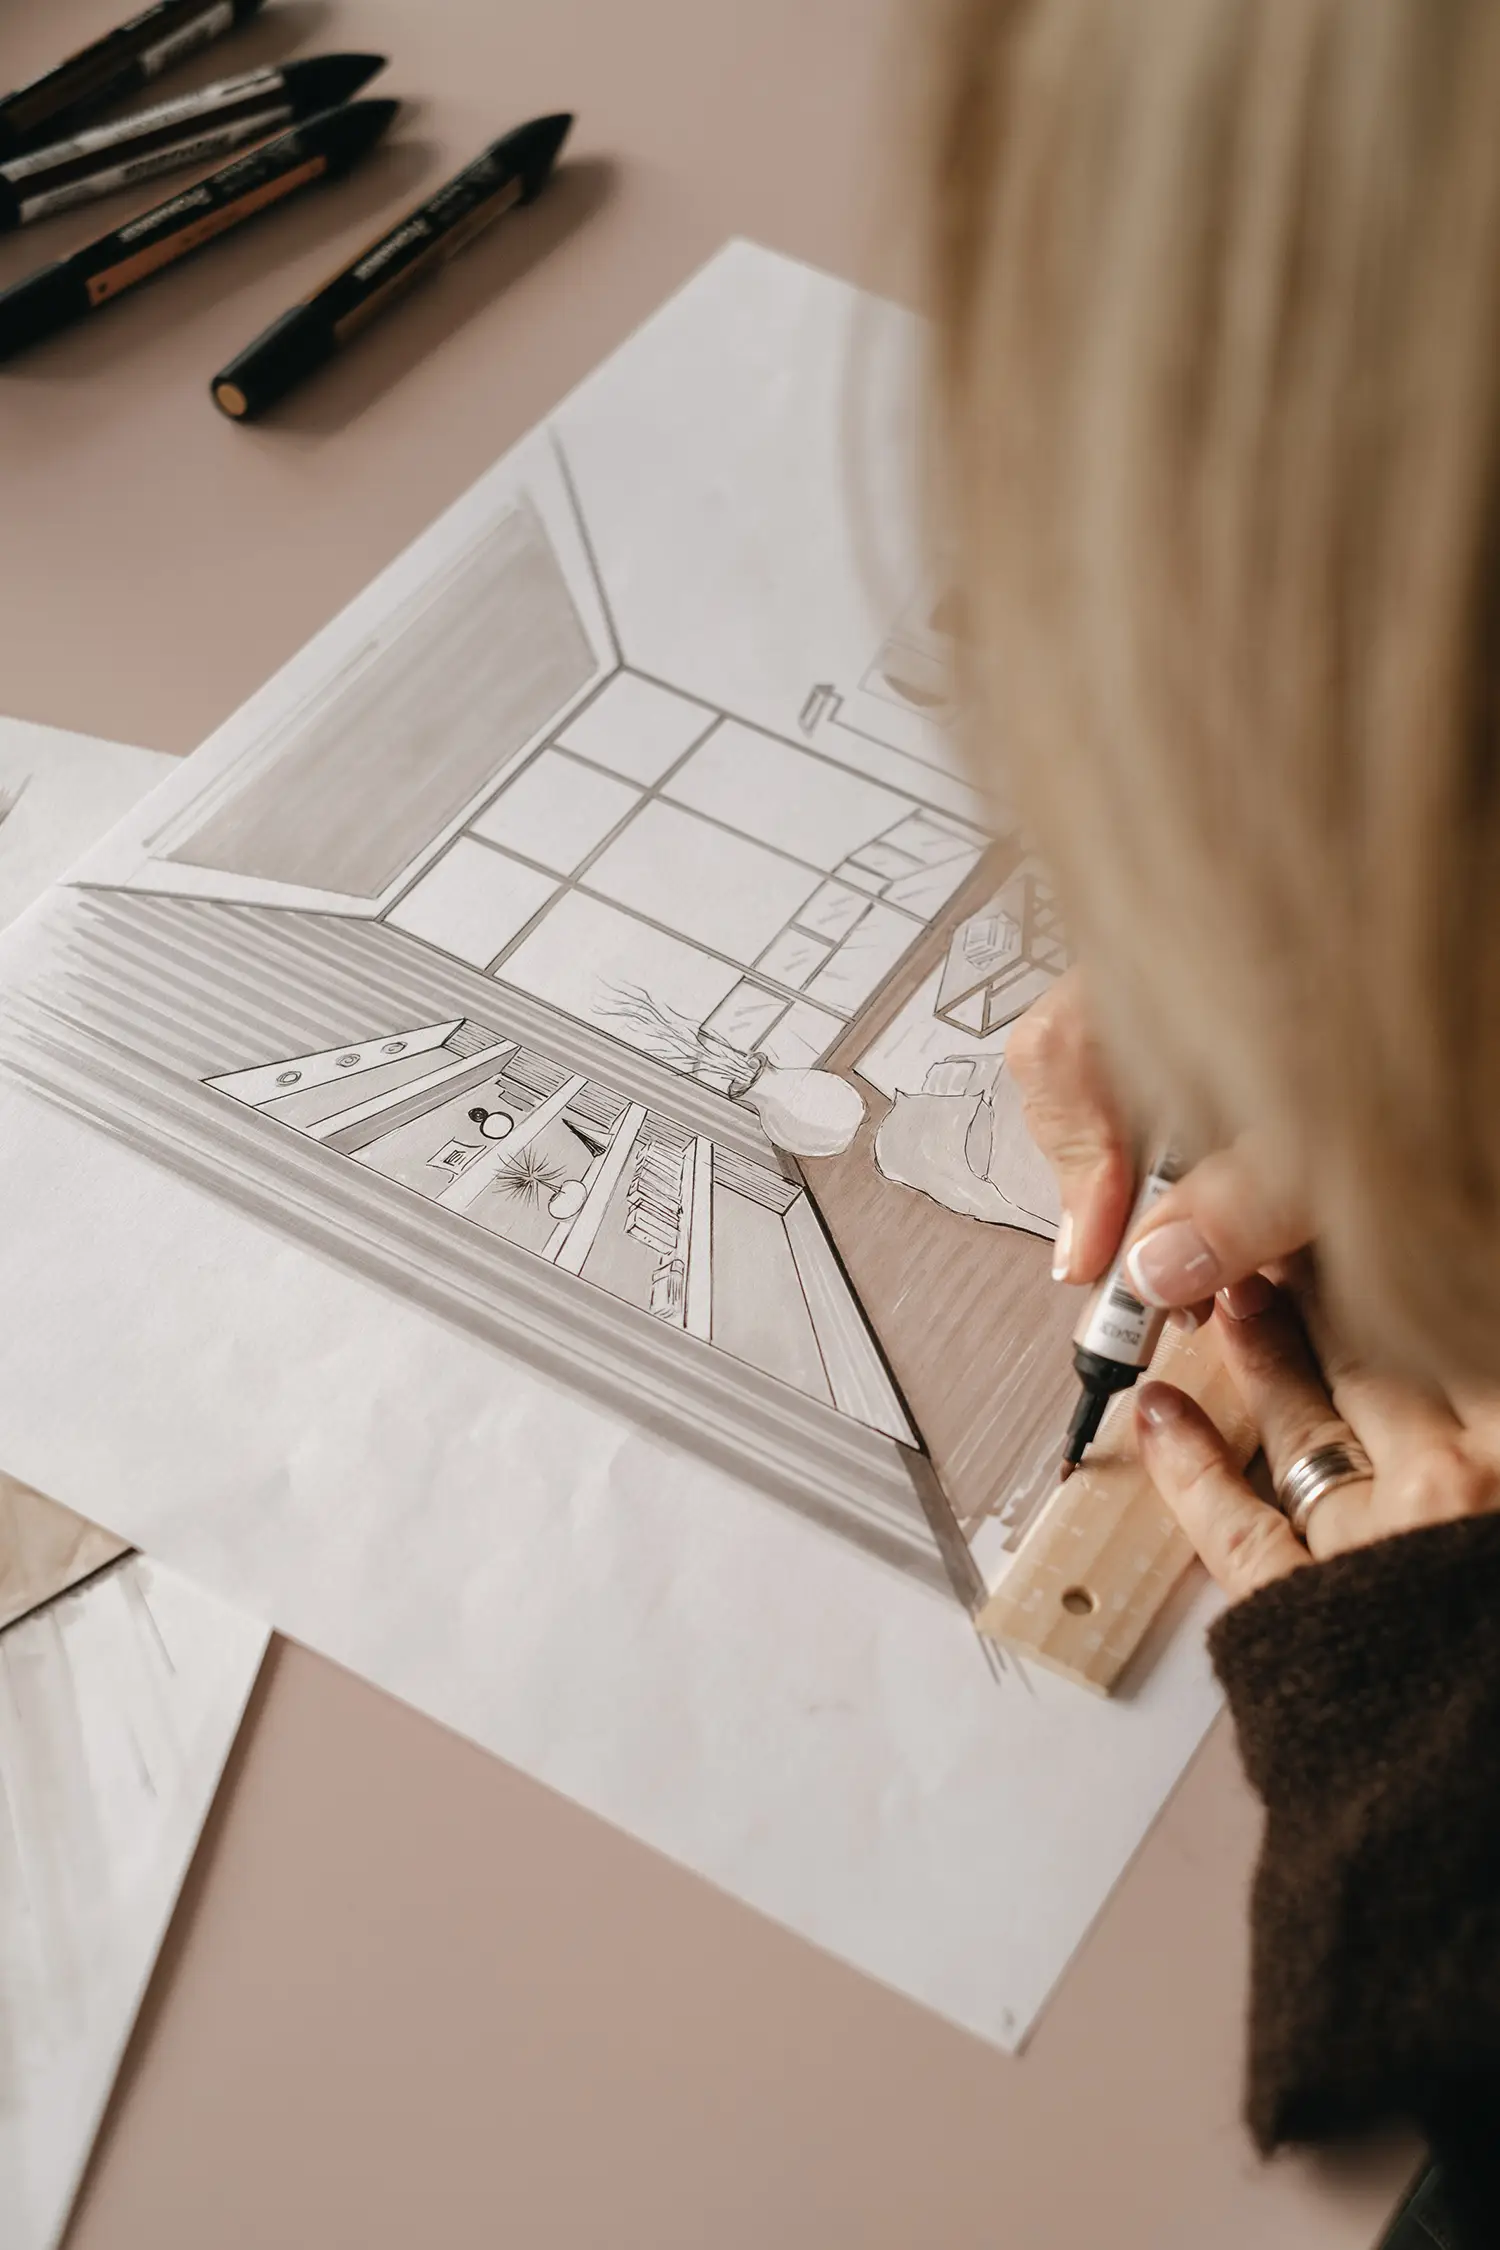 Interior designer Stefania Luraghi, founder of studio Elles Interior Design, as she works on the technical drawing of a renovation project.